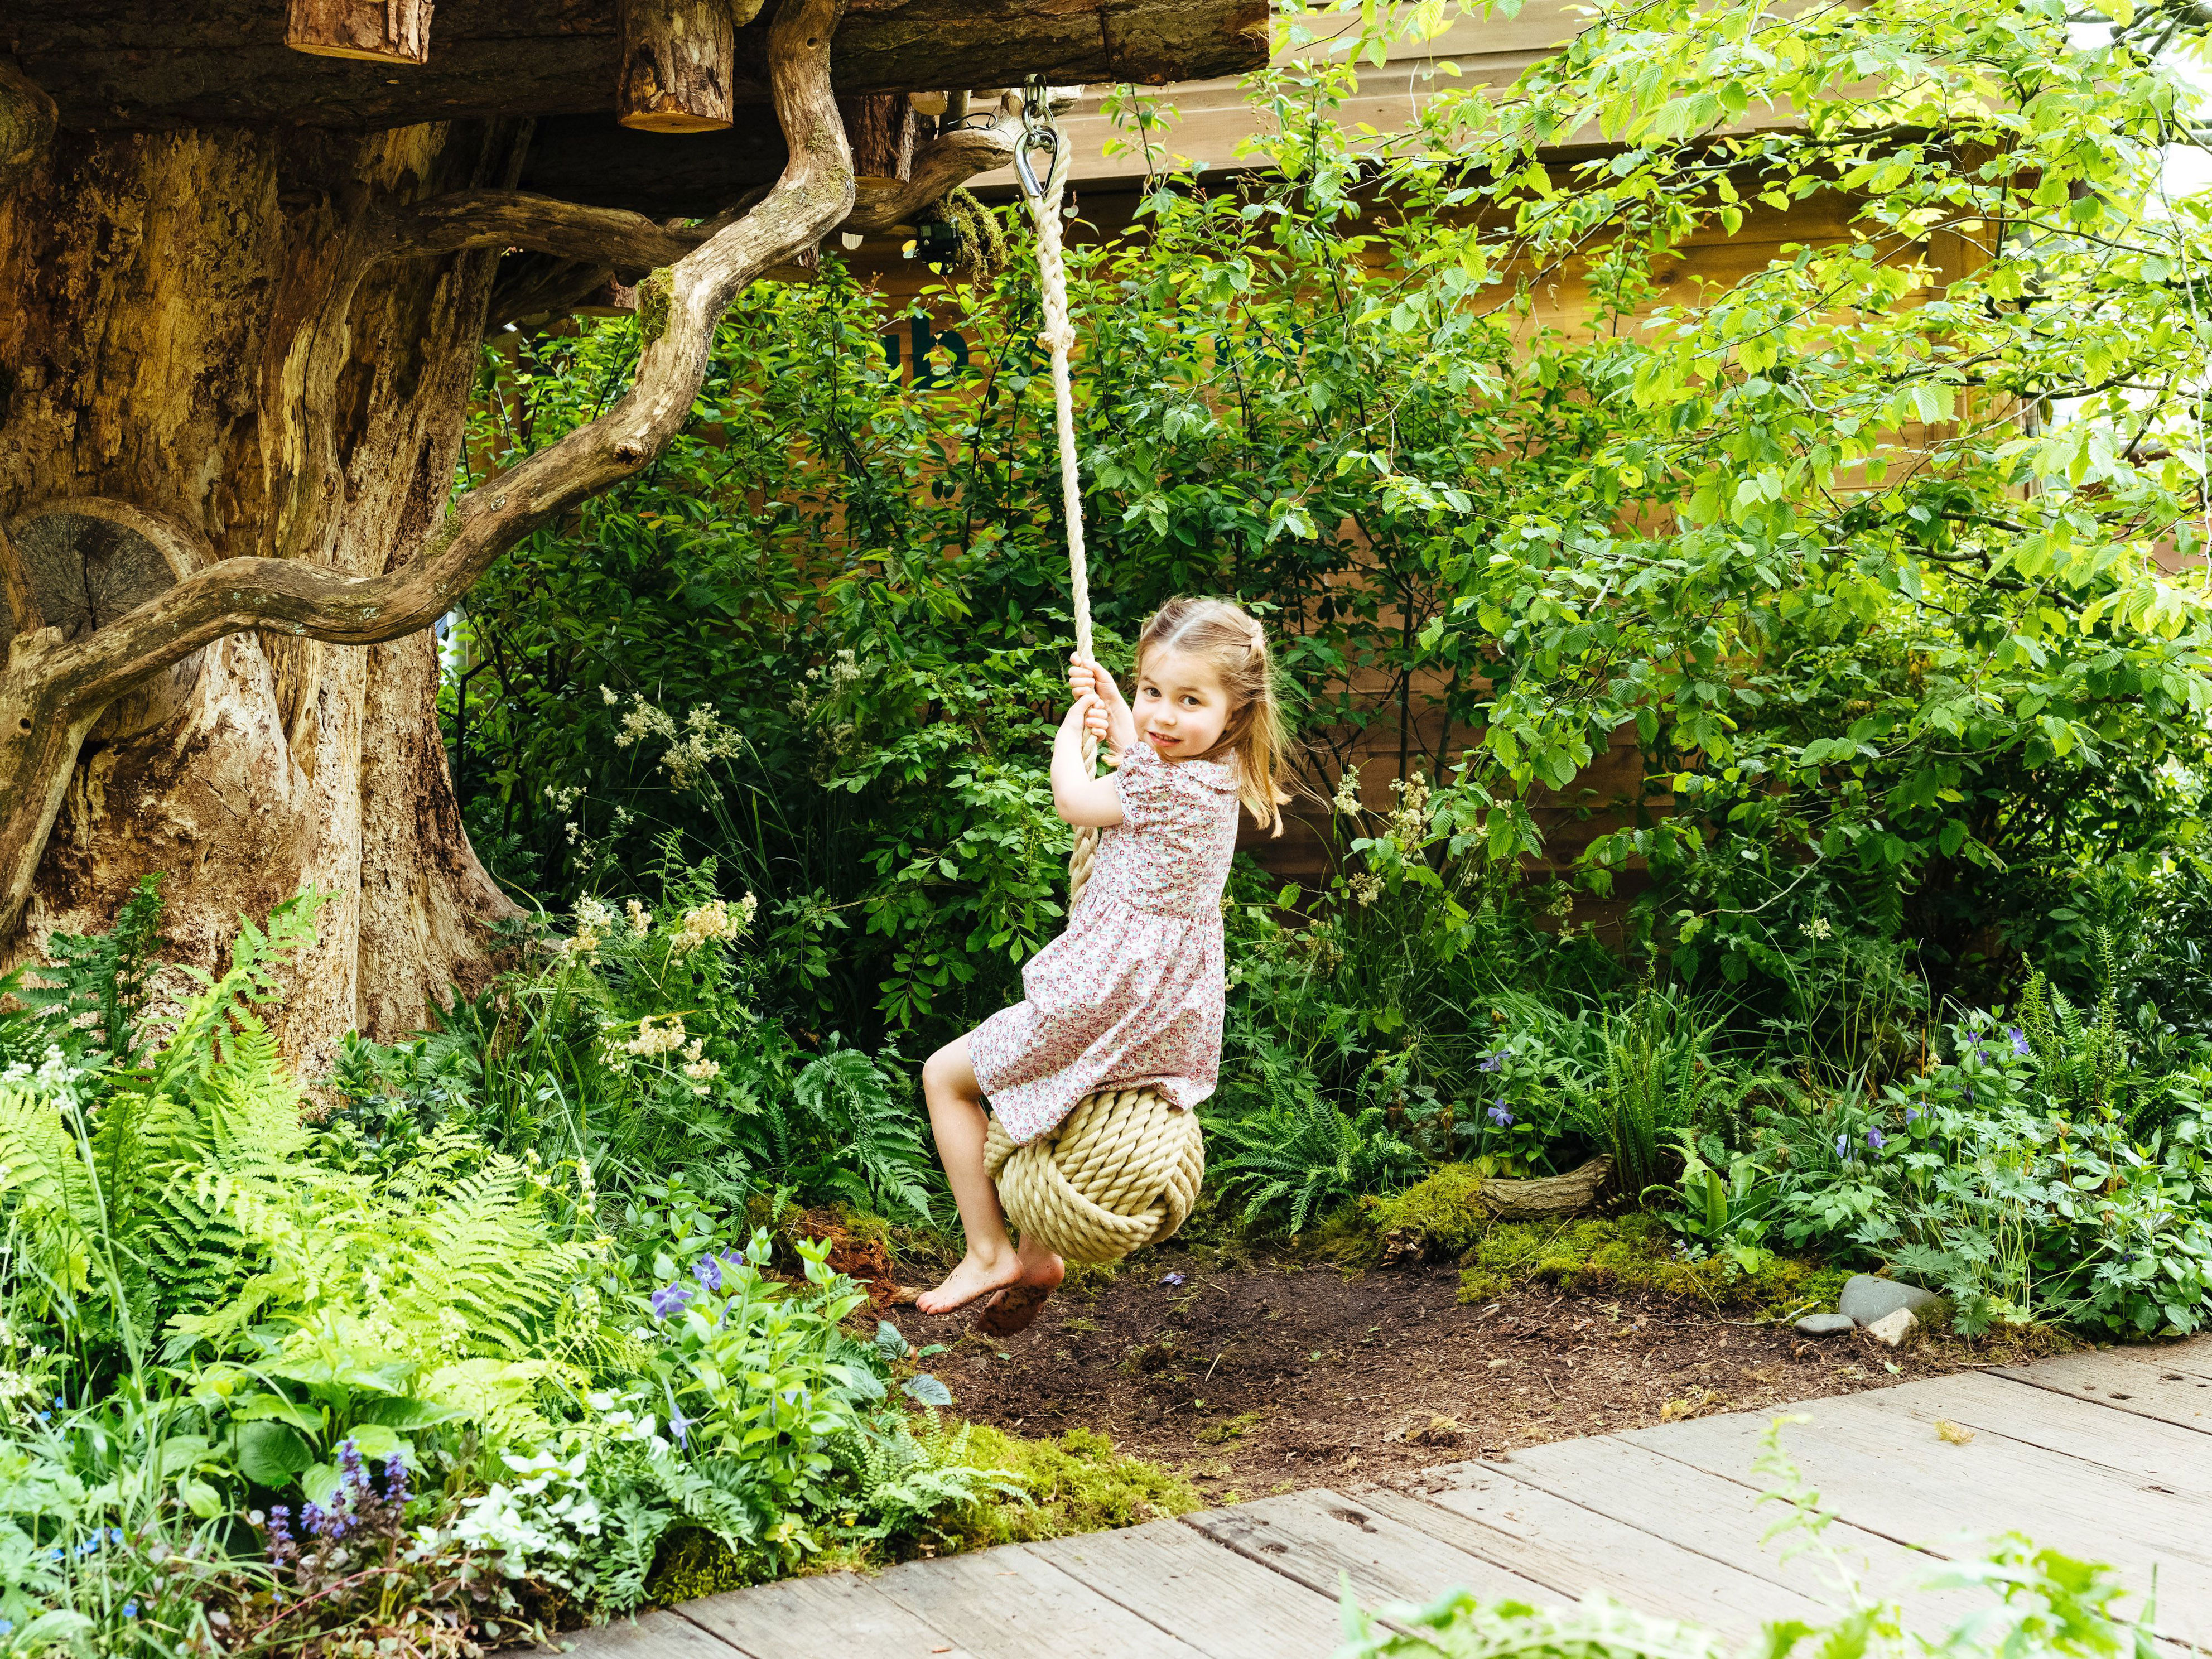 <p>Princess Charlotte played on a rope ball swing in the garden mom <a href="https://www.wonderwall.com/celebrity/profiles/overview/duchess-kate-1356.article">Duchess Kate</a> co-designed with Adam White and Andree Davies for the RHS Chelsea Flower Show in London on May 19, 2019.</p>